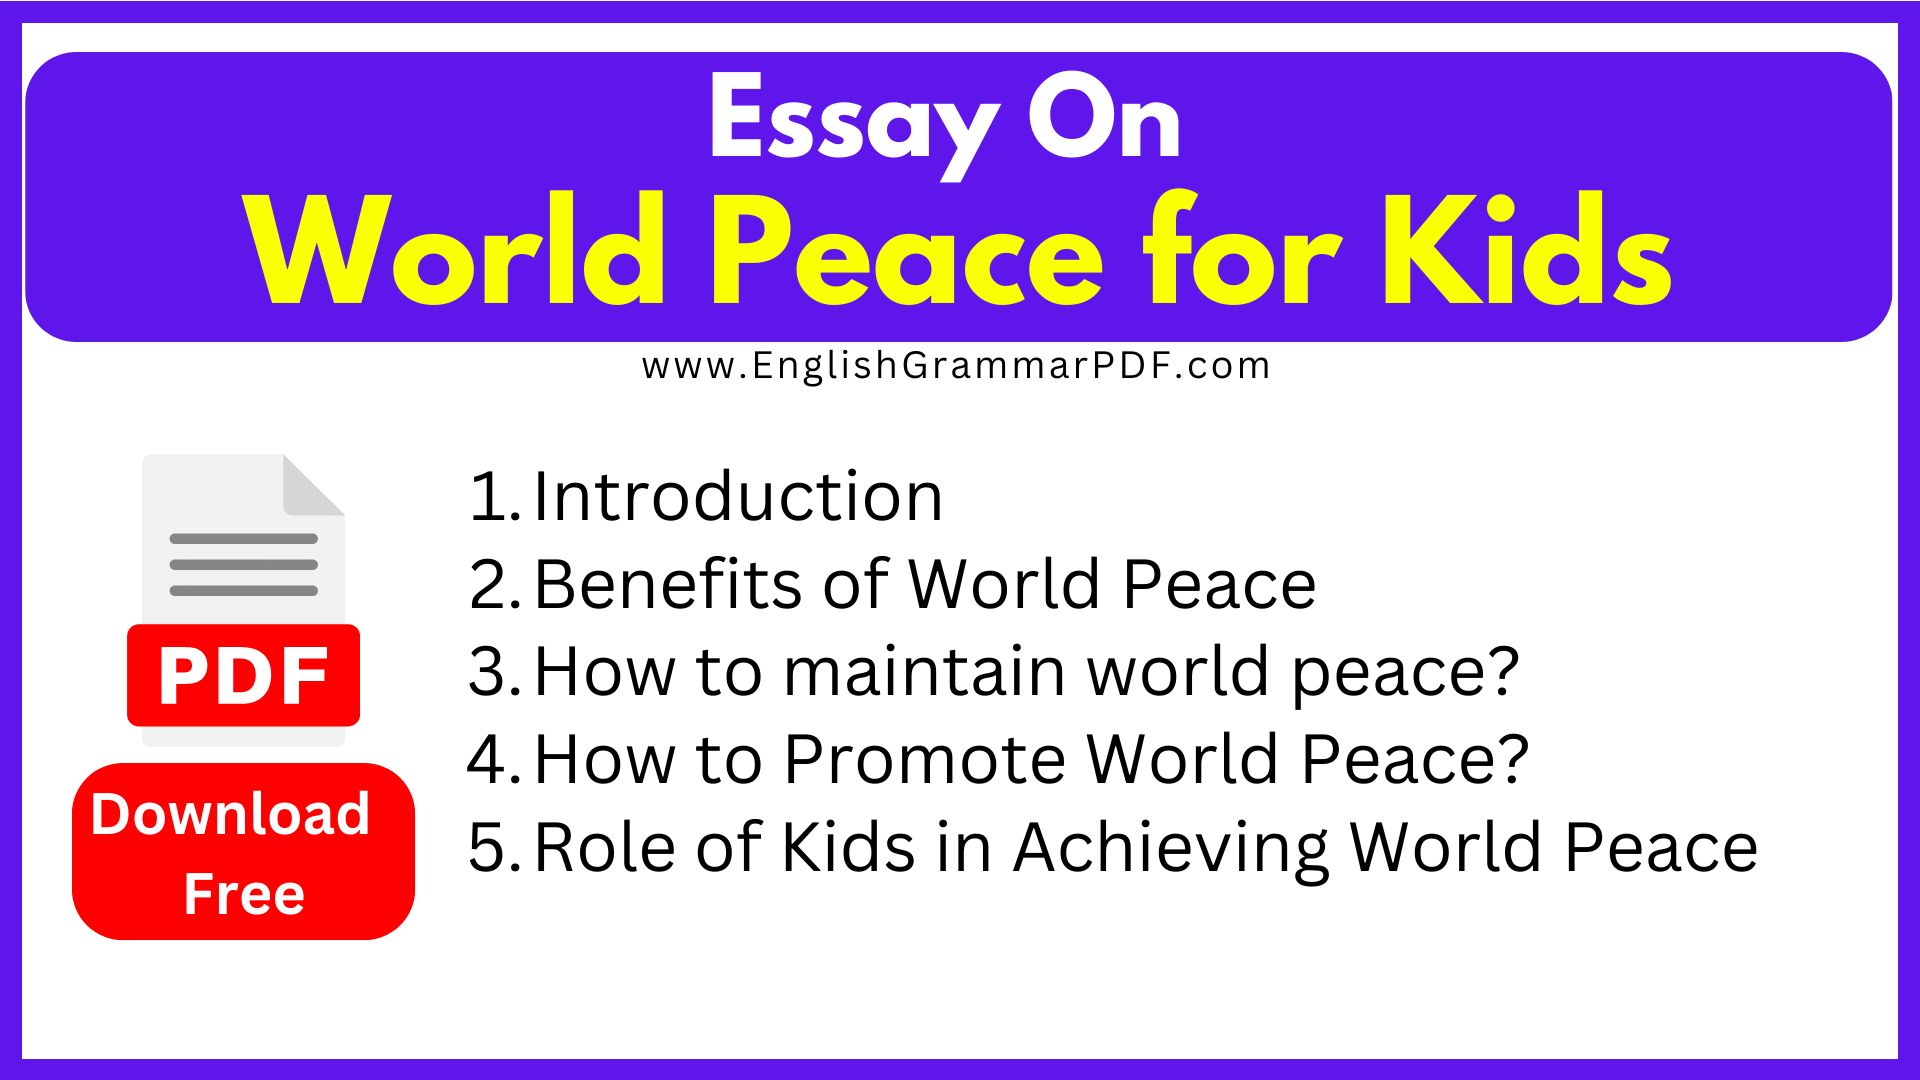 Essay On World Peace for Kids